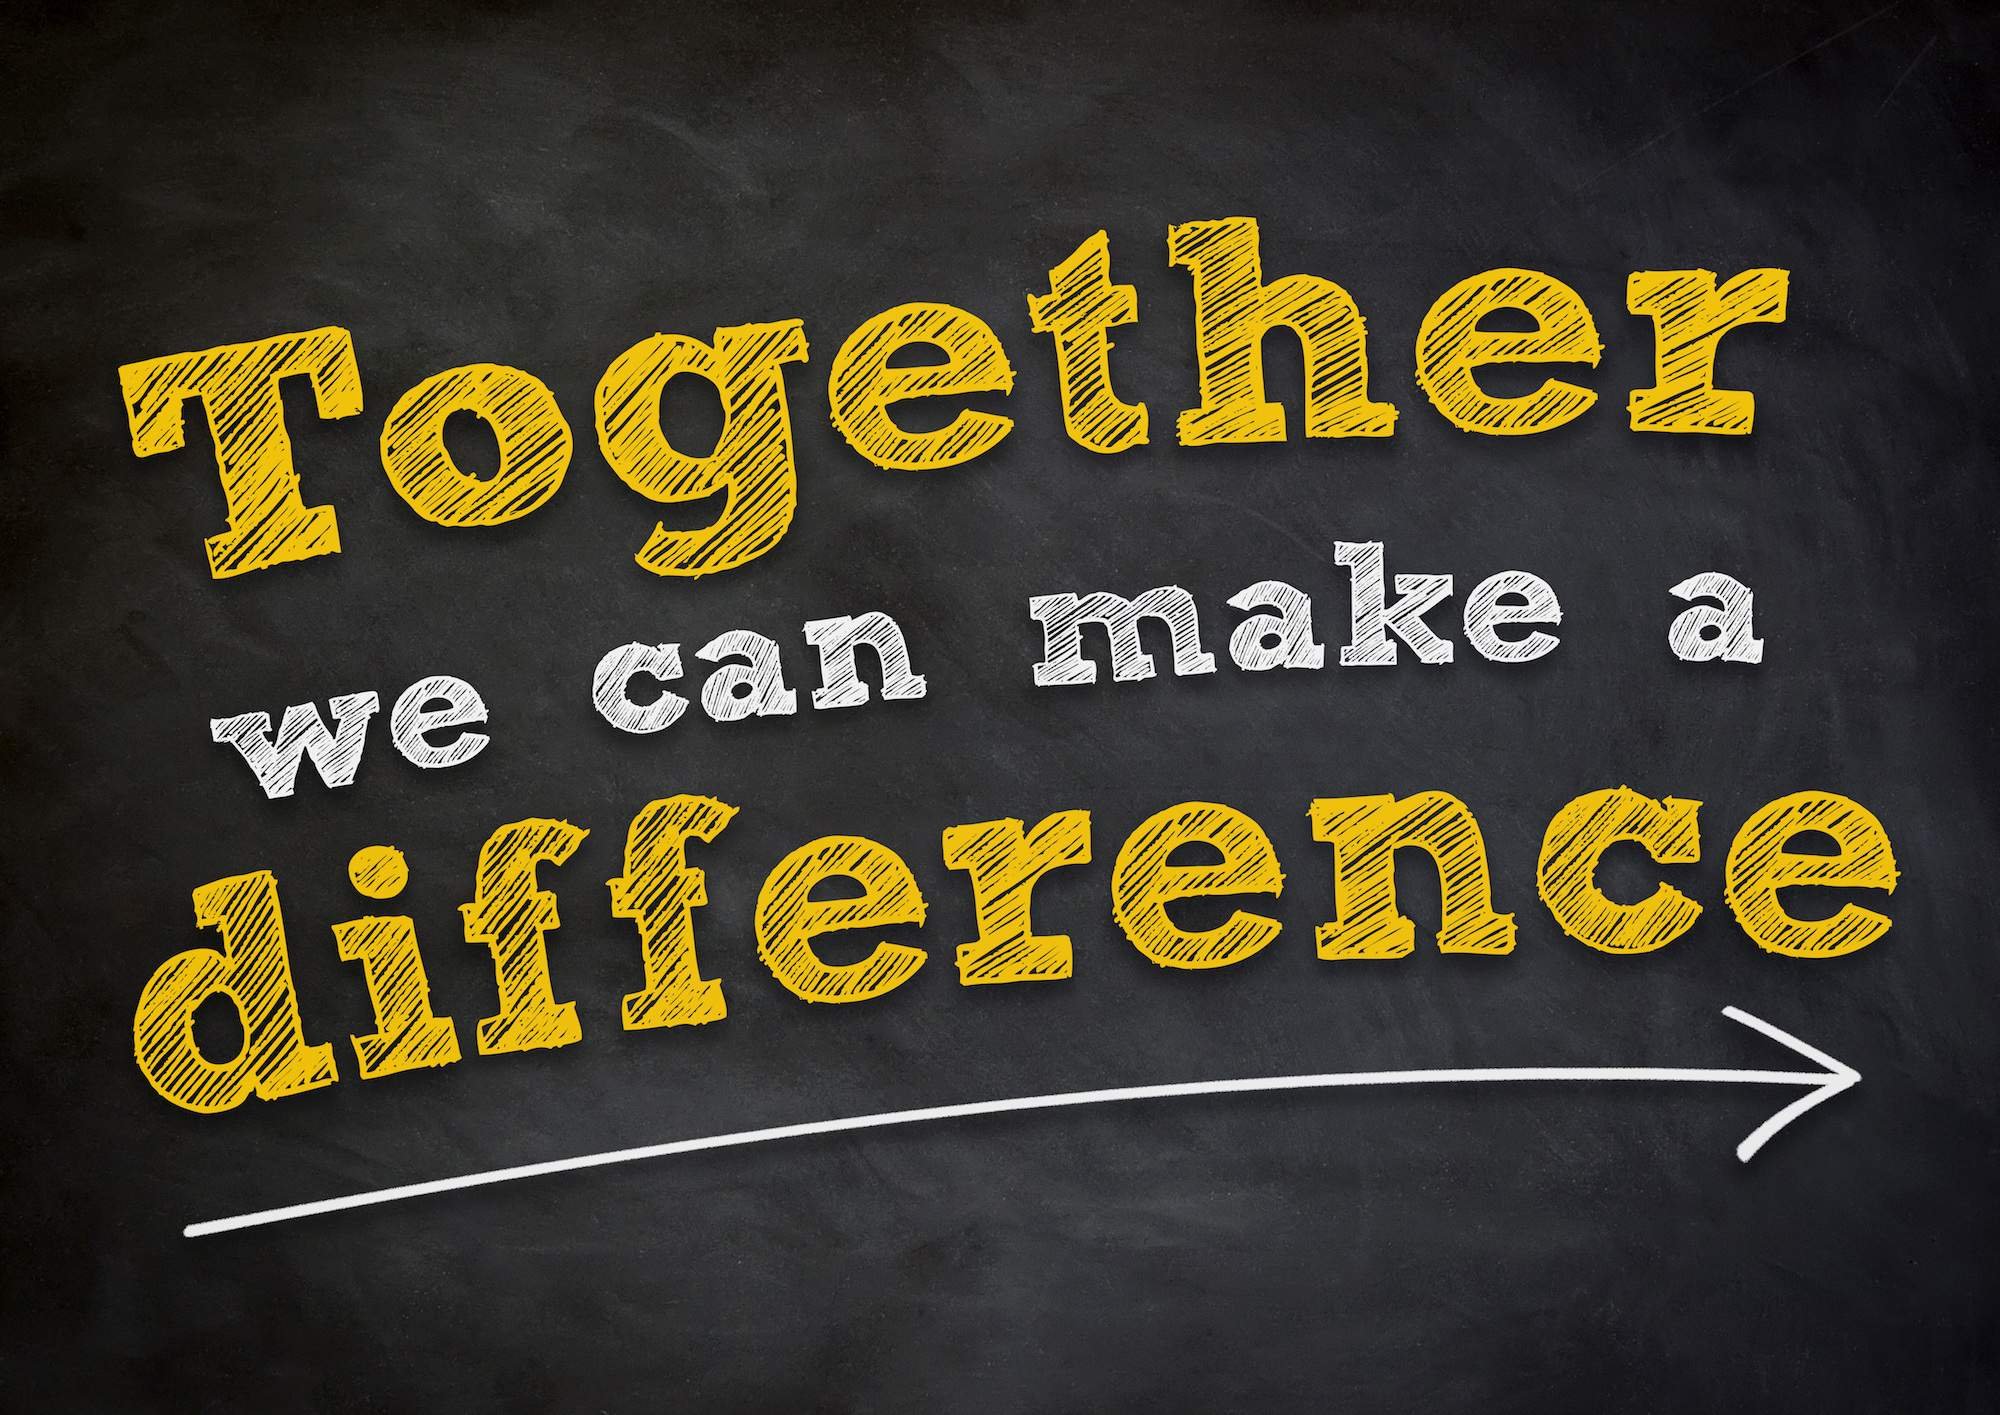 https://s3.us-east-2.amazonaws.com/partiko.io/img/partiko-together-we-can-make-a-difference-1528488948551.png